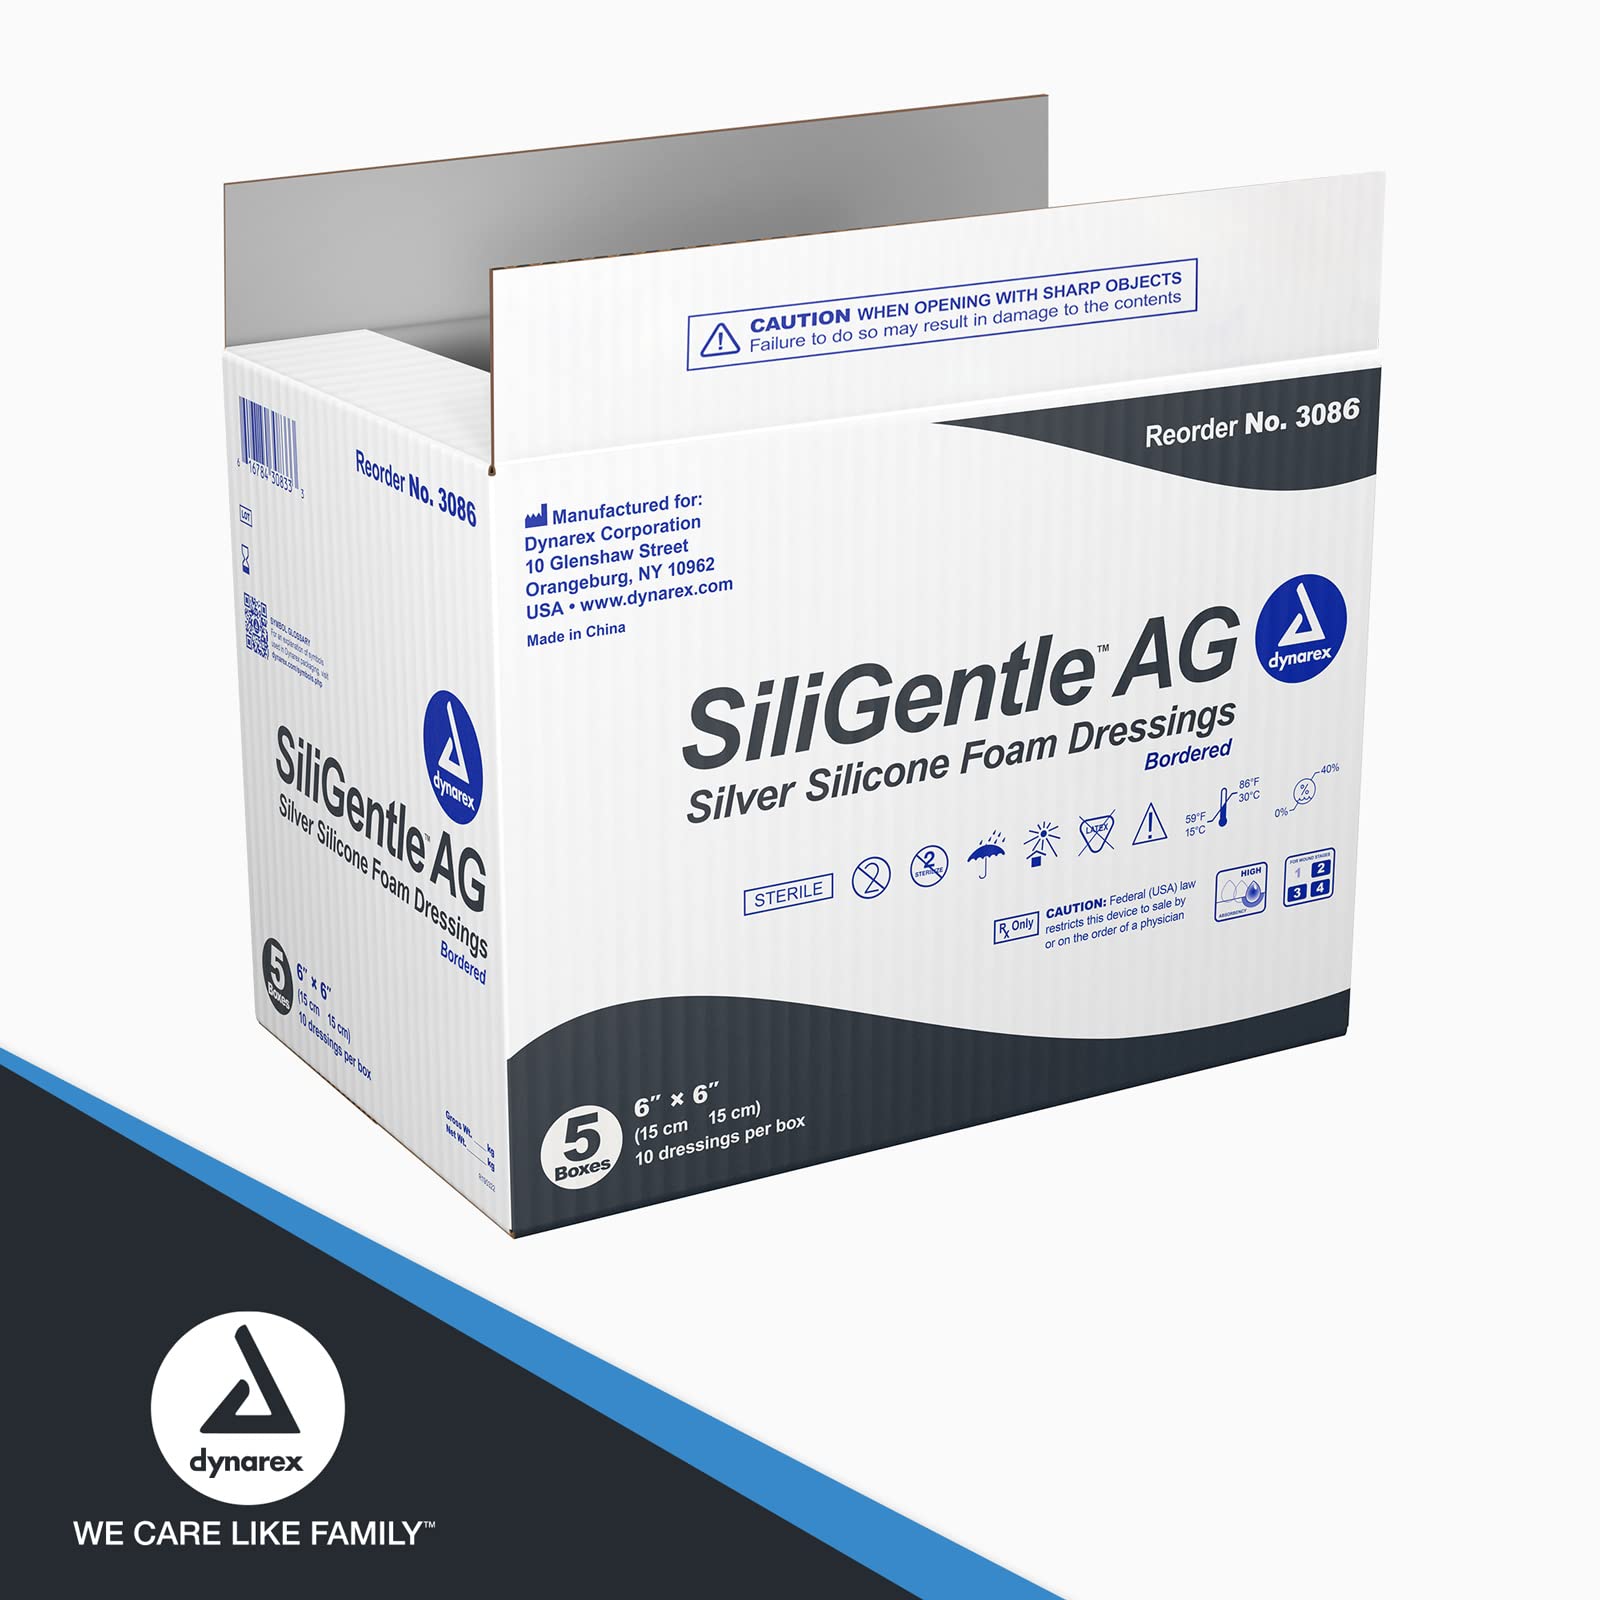 Dynarex SiliGentle AG Silver Silicone Foam Dressings, Wound Care, Soft & Absorbent, 6” x 6” Adhesive Foam Pad Dressing with Silicone Layer, 1 Case of 50 Dressings